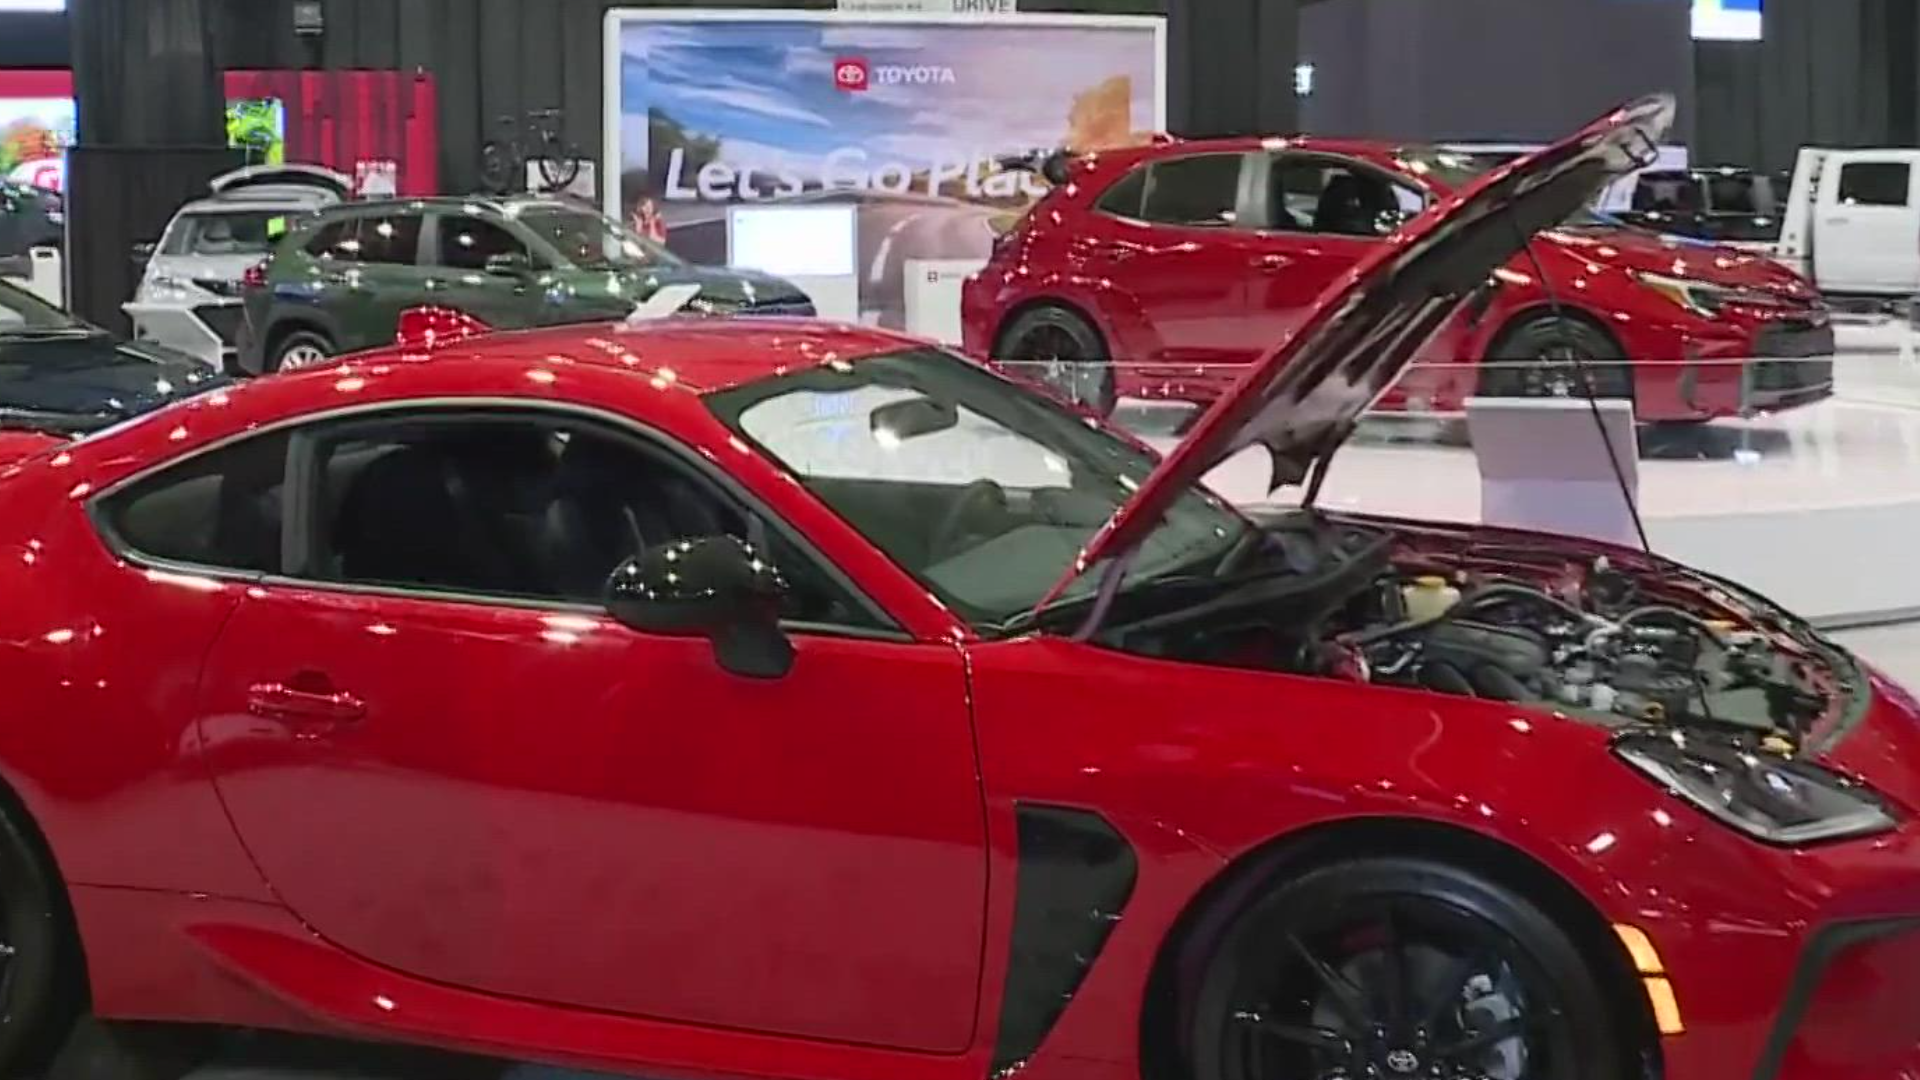 More than 500 vehicles will take over the I-X Center for the Cleveland Auto Show, which also features classic cars, ride and drives, Millionaire's Row and more.